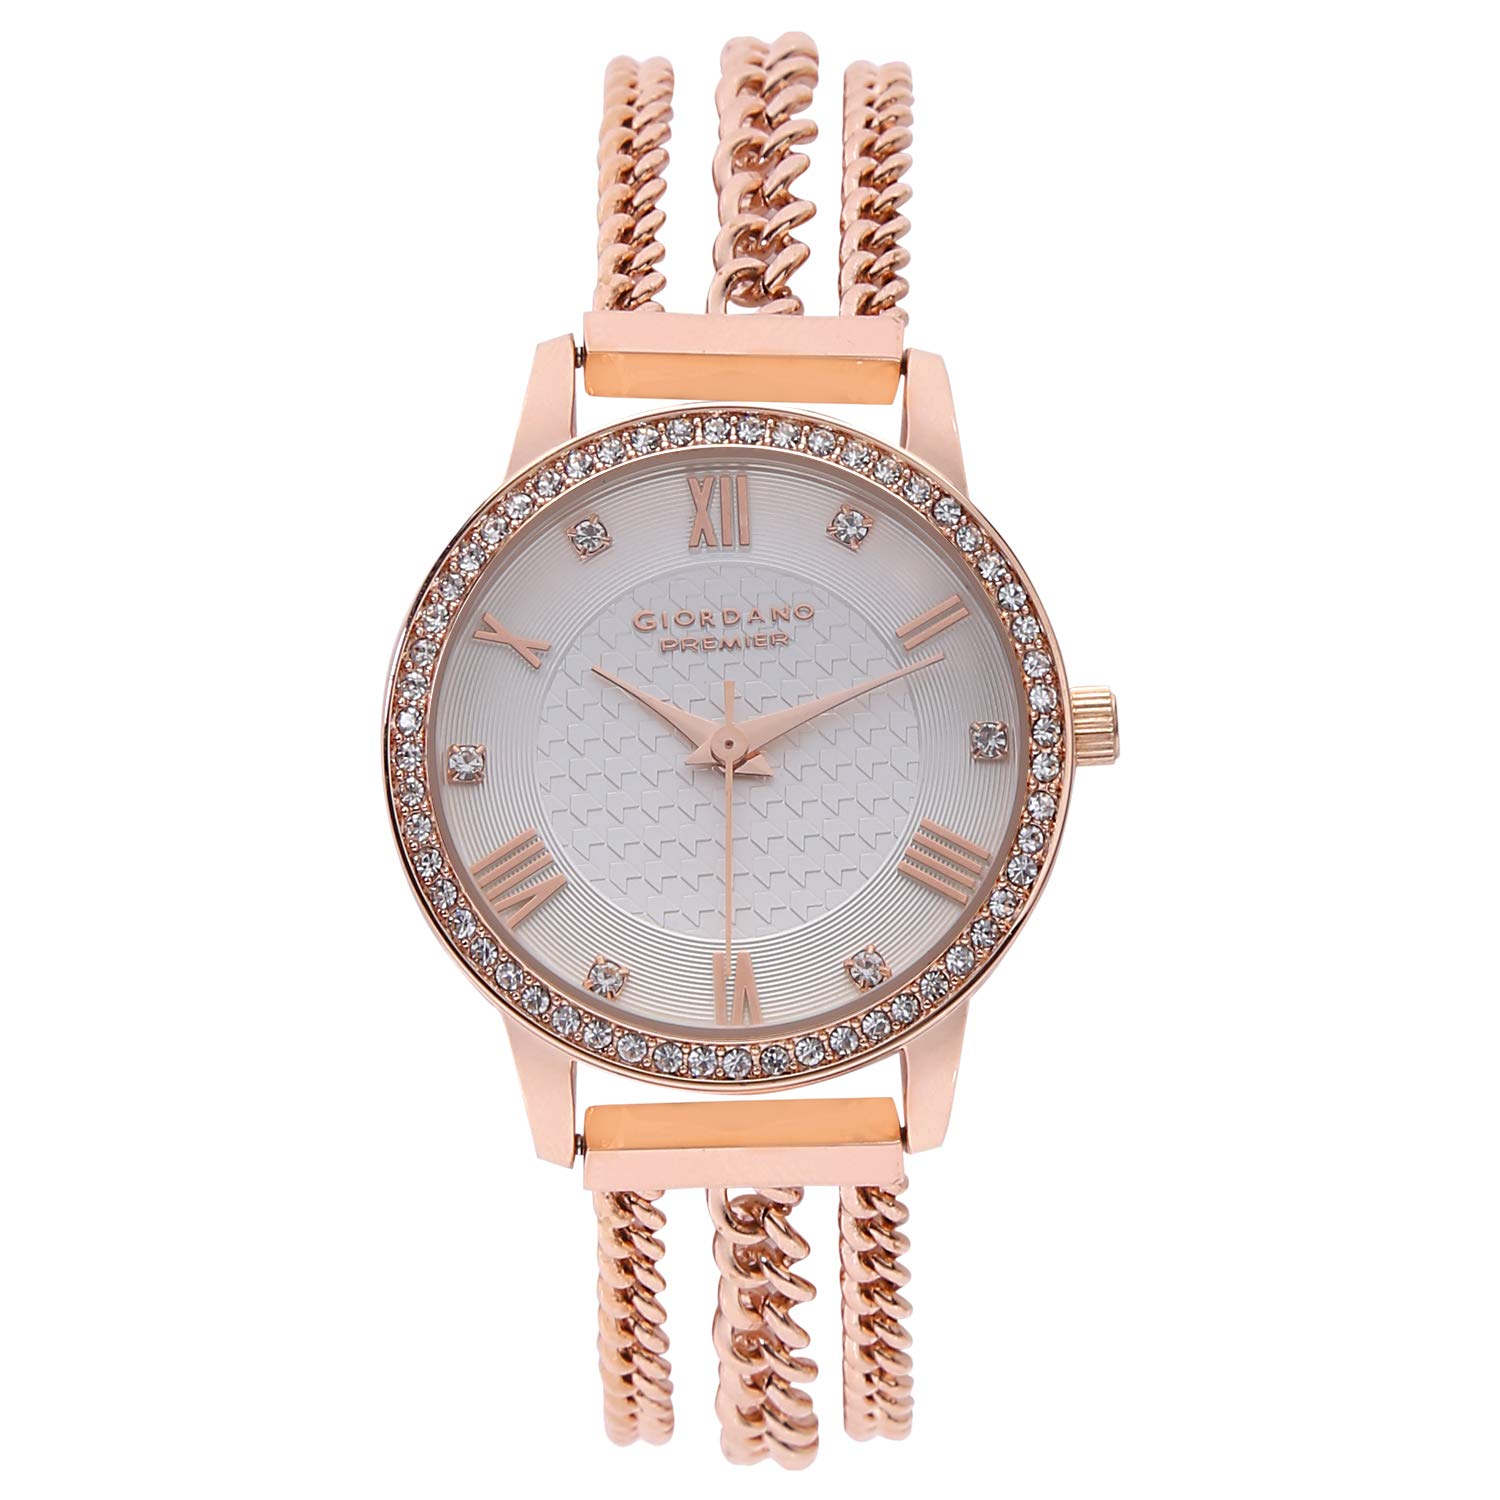 Giordano Women's Jewellery White Dial Rose Gold Metal Strap Watch, Model No. A2061-44 Price in India